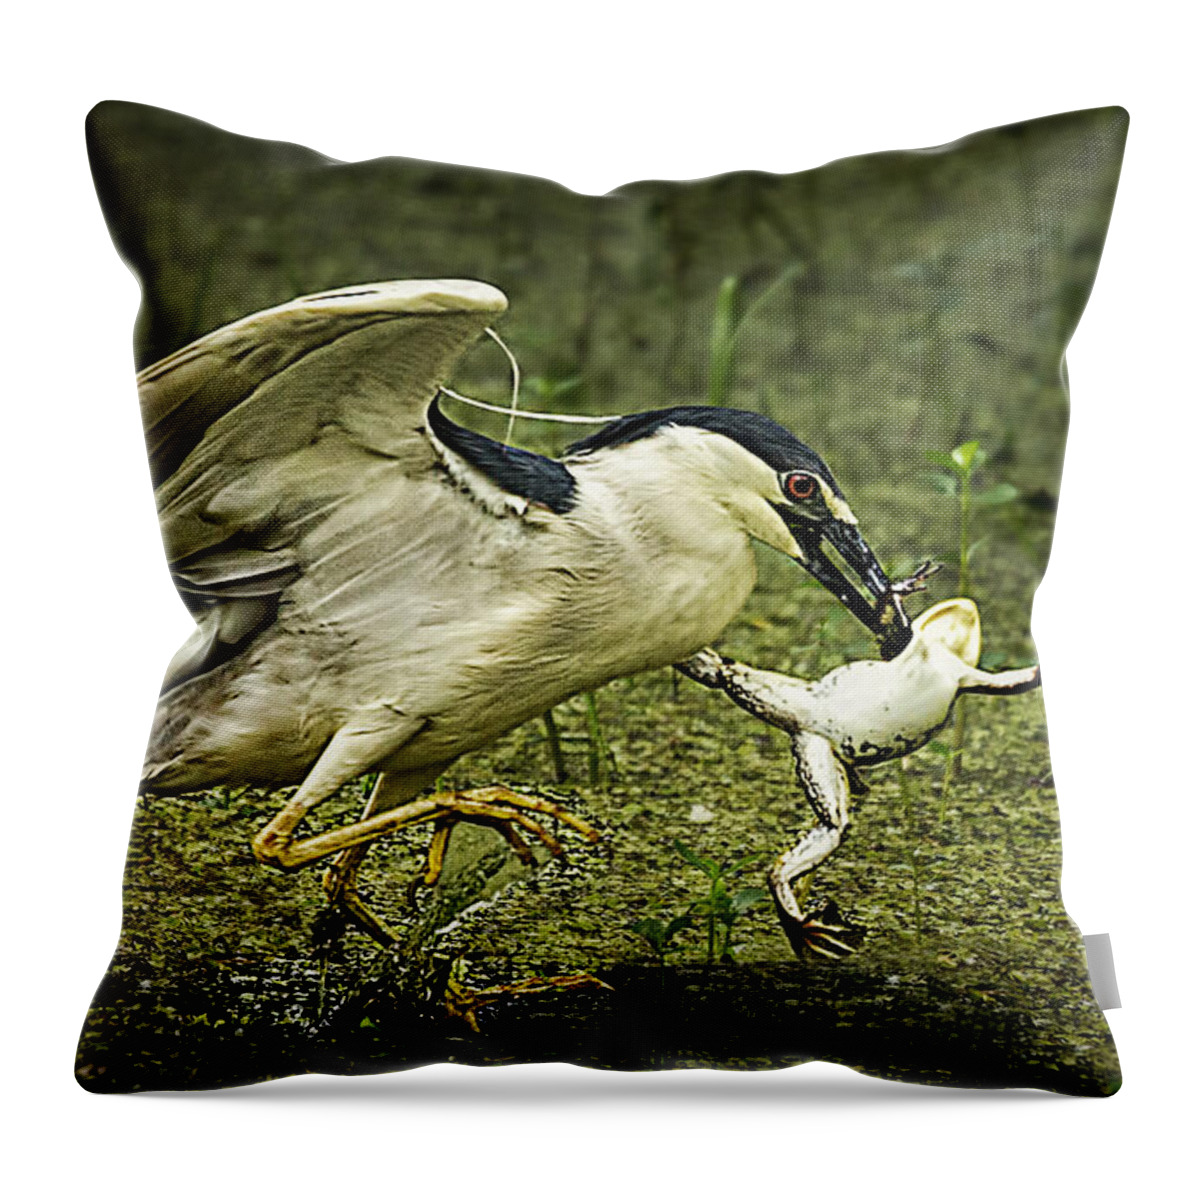 Black-crowned Night Heron Throw Pillow featuring the photograph Catching Supper by Priscilla Burgers